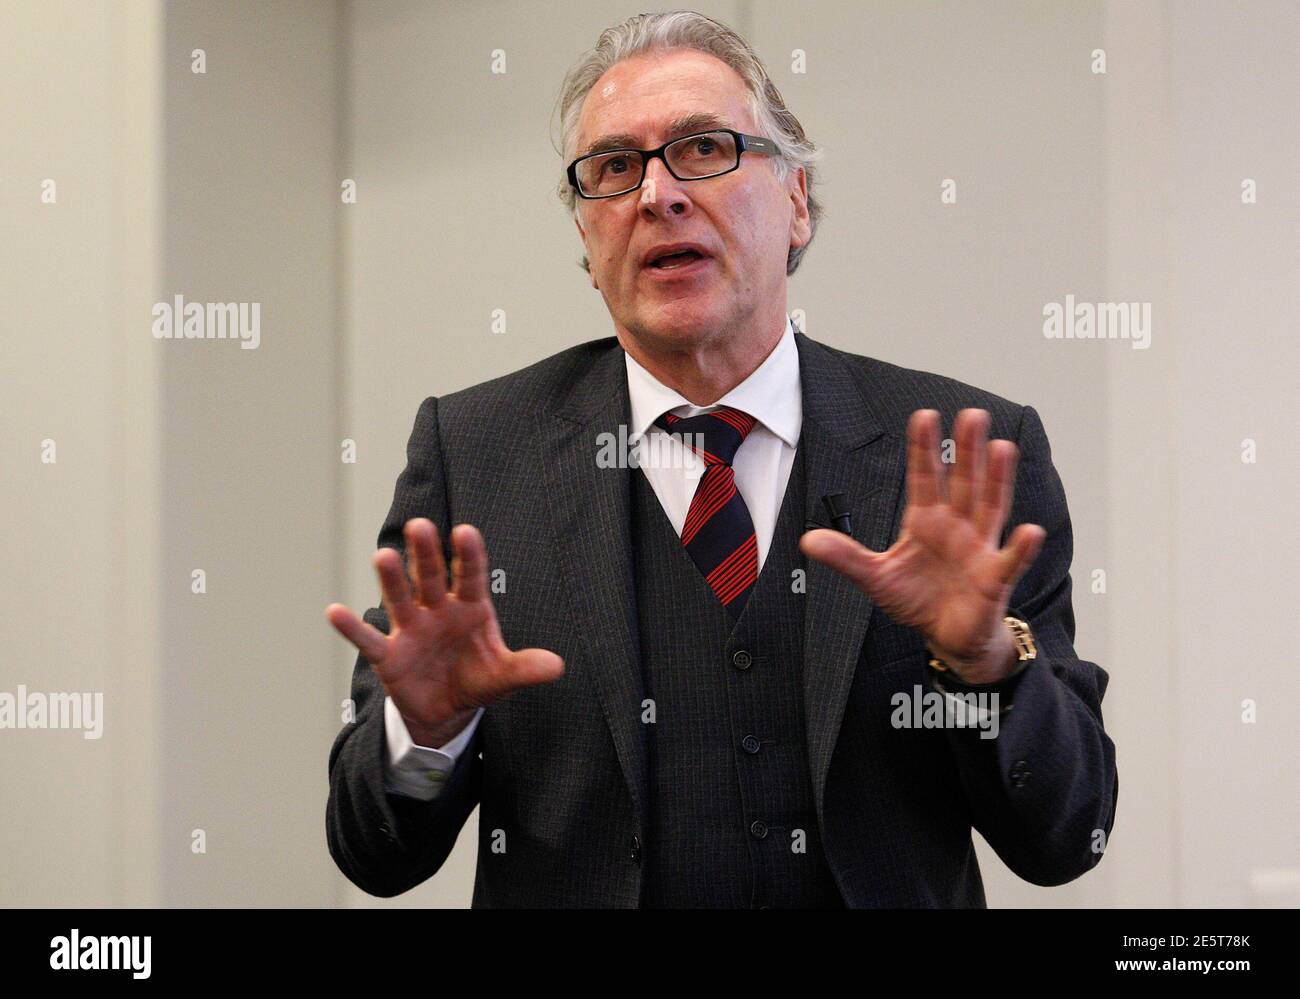 Swiss bank Clariden Leu new CEO Hanspeter Kurzmeyer attends a news  conference in Zurich, November 15, 2011. Credit Suisse Group AG will  integrate private bank Clariden Leu into its organisation, ending the